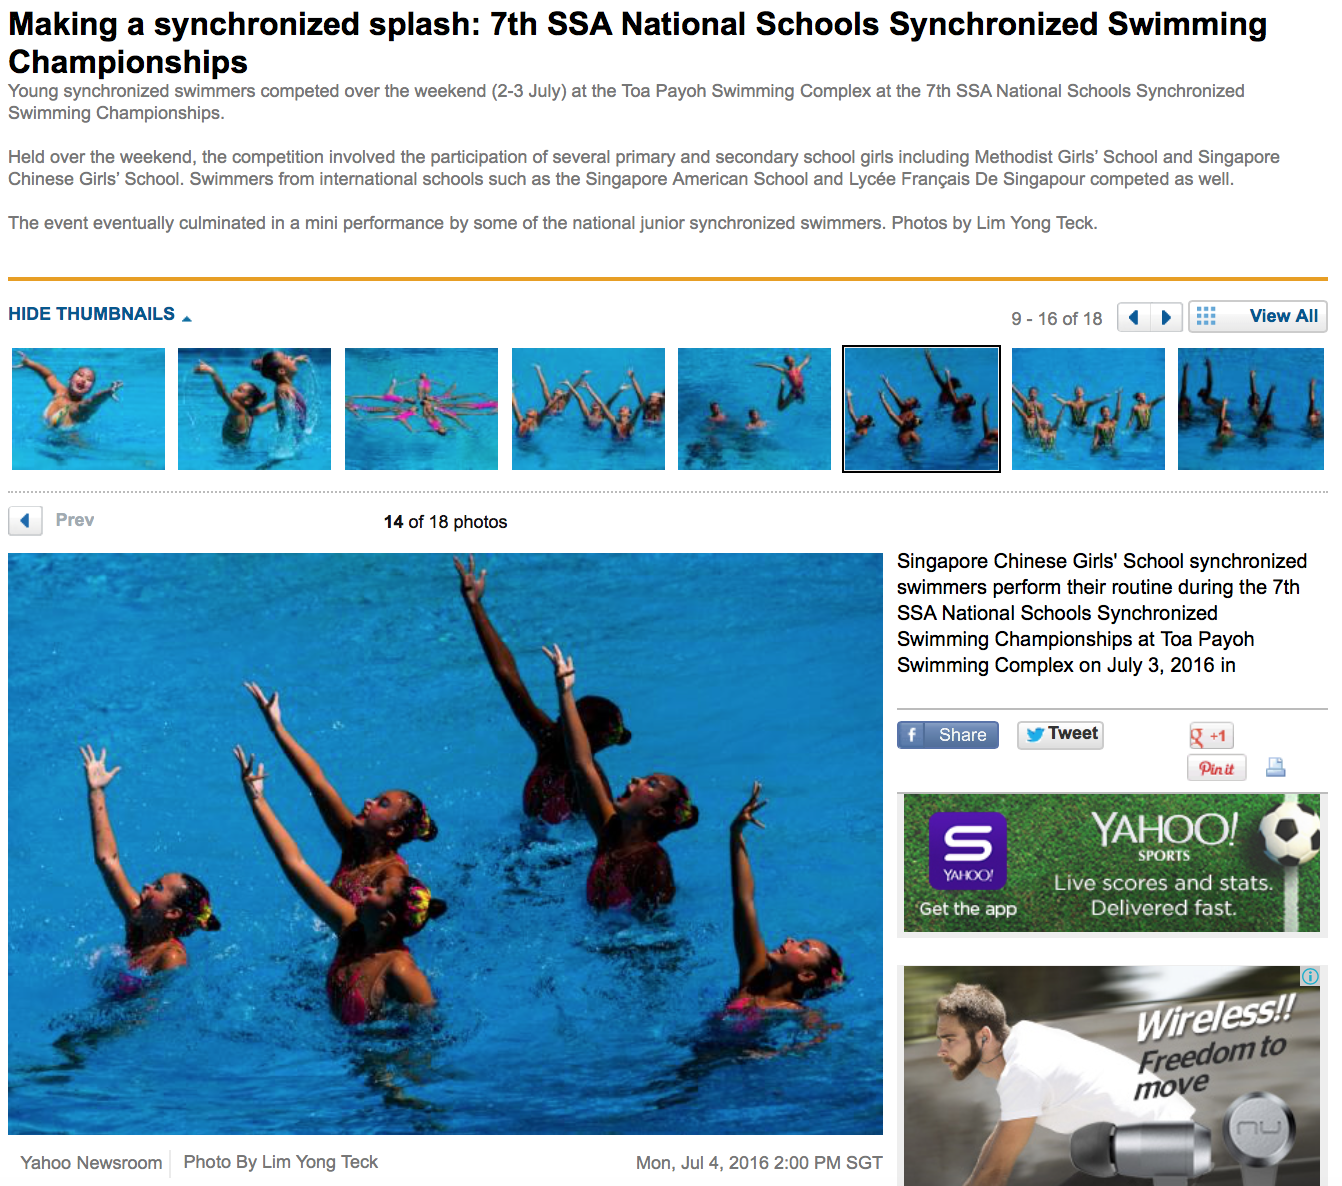  7th SSA National Schools Synchronized Swimming Championships for Yahoo! (www.yahoo.com) 